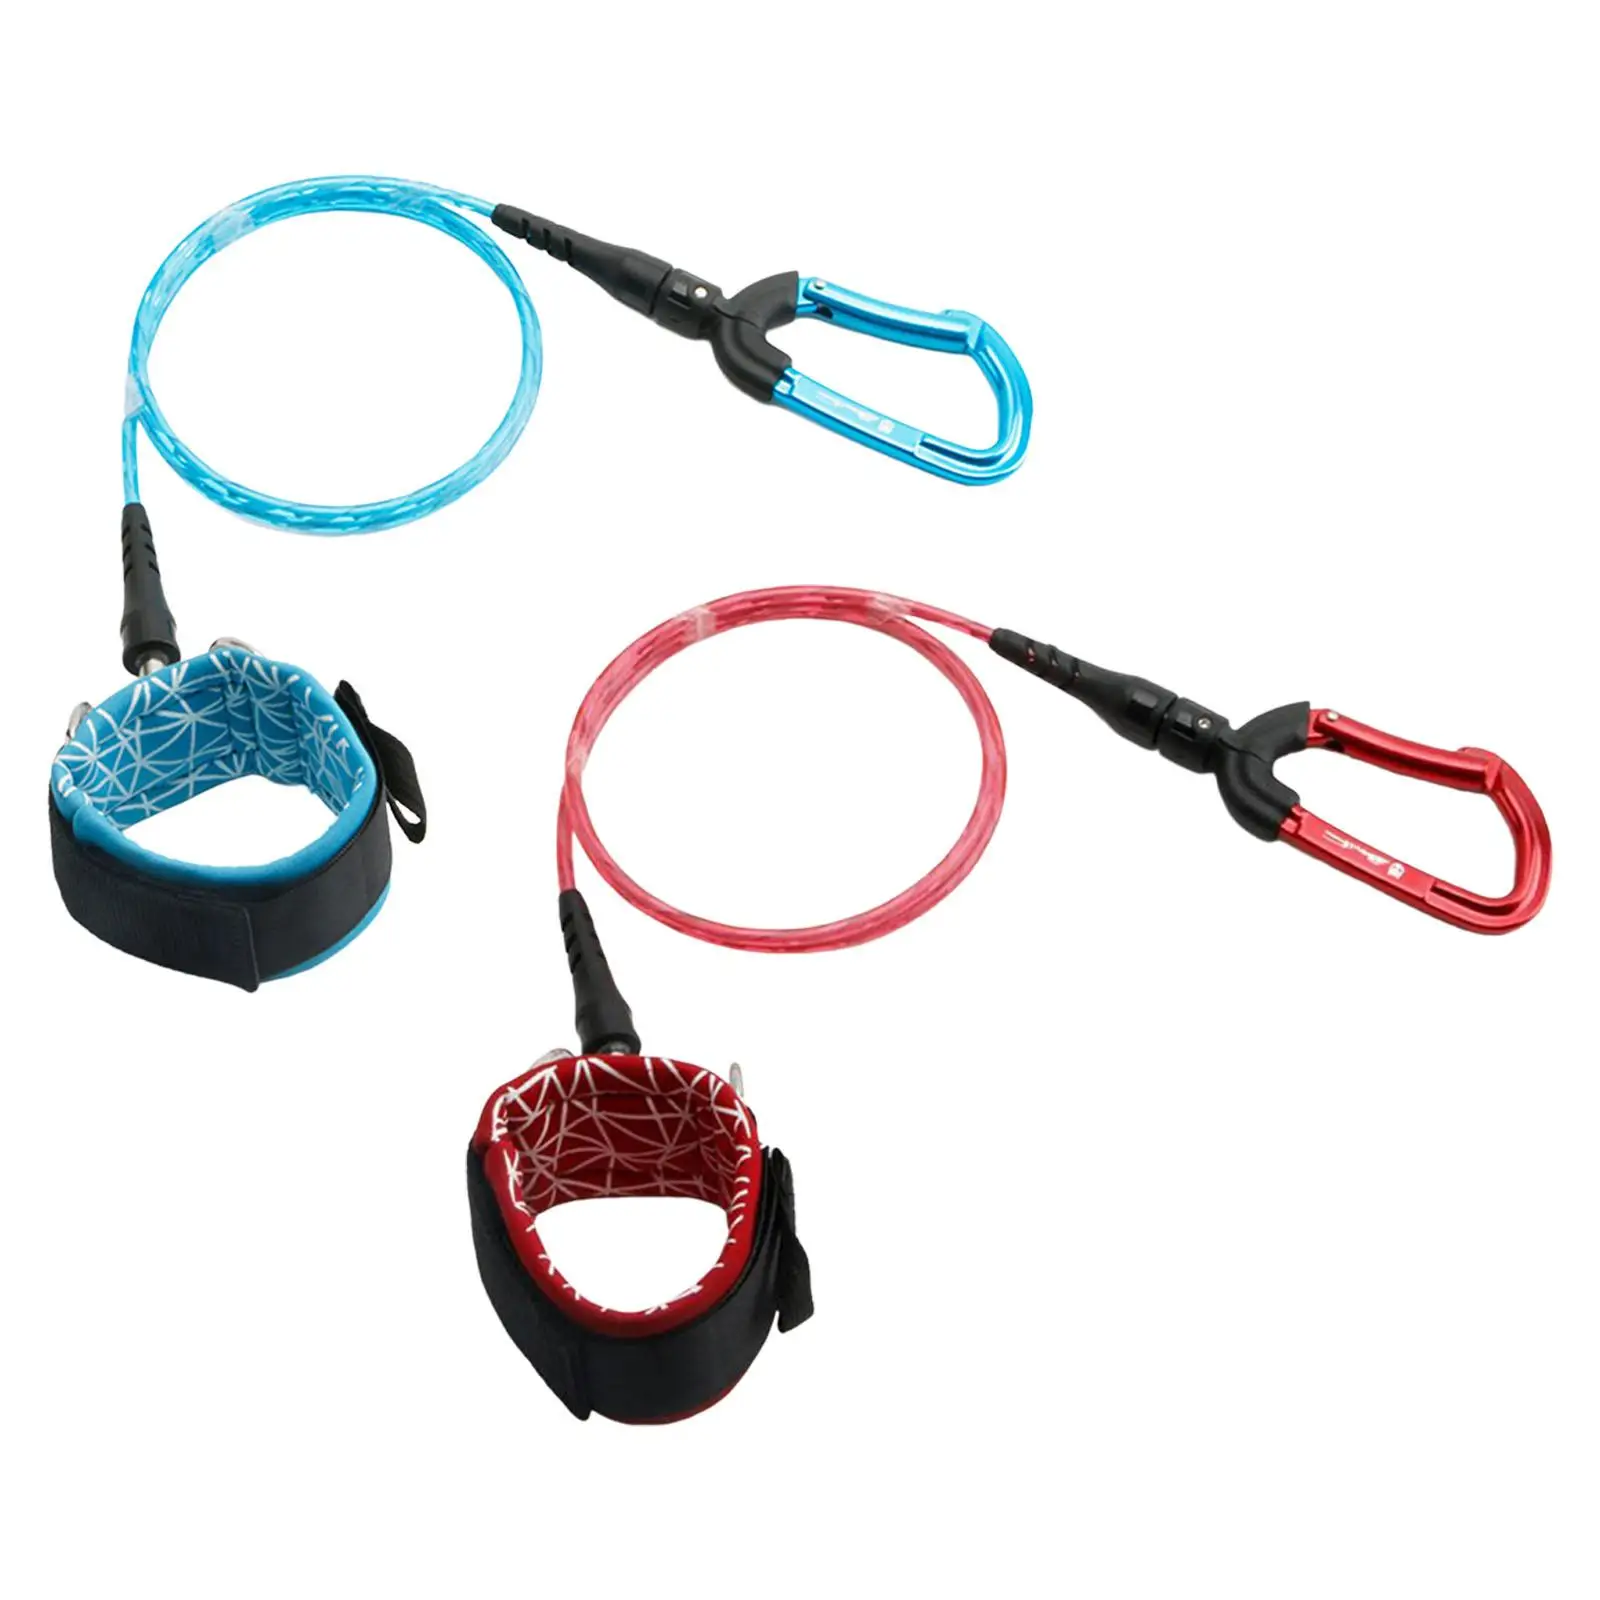 Freediving Lanyard Comfortable with Scuba Diving Rope Fits for Underwater Sports